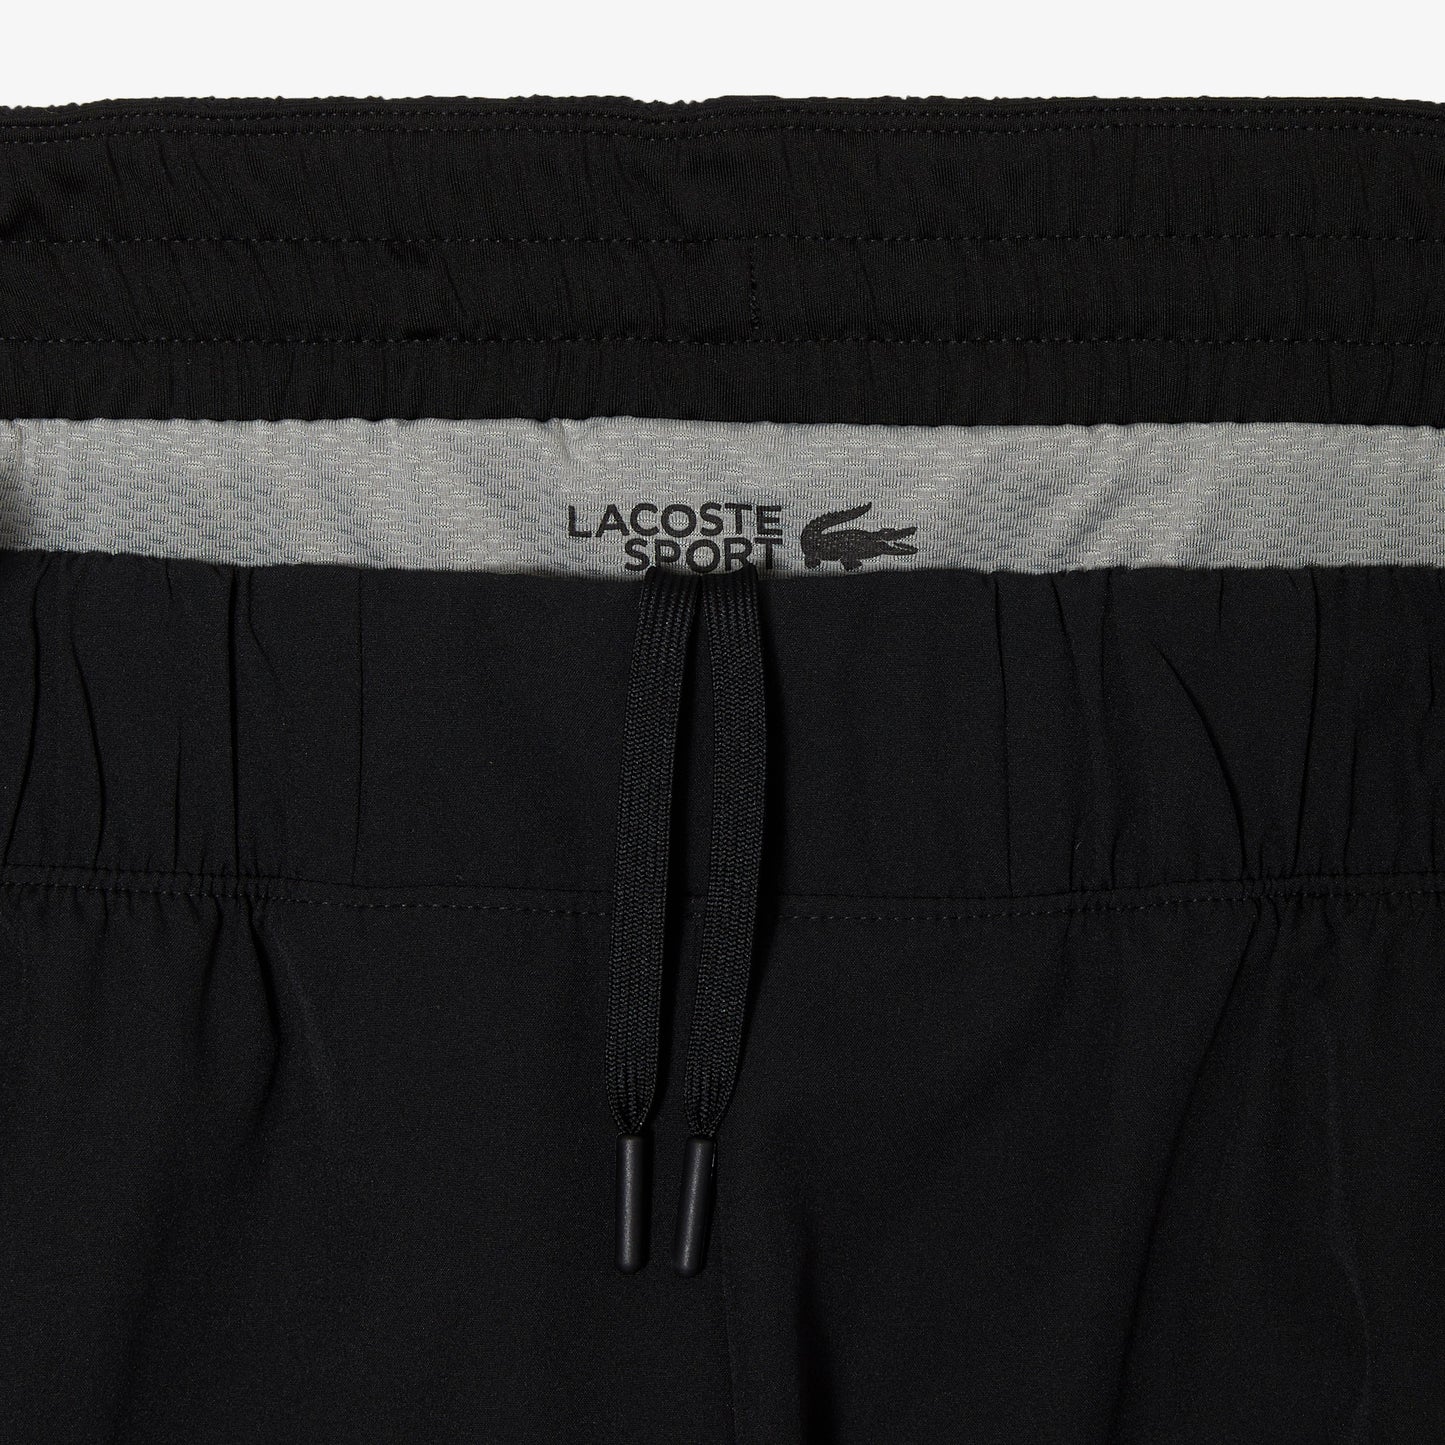 Mens Two-Tone Lacoste Sport Shorts with Built-in Undershorts